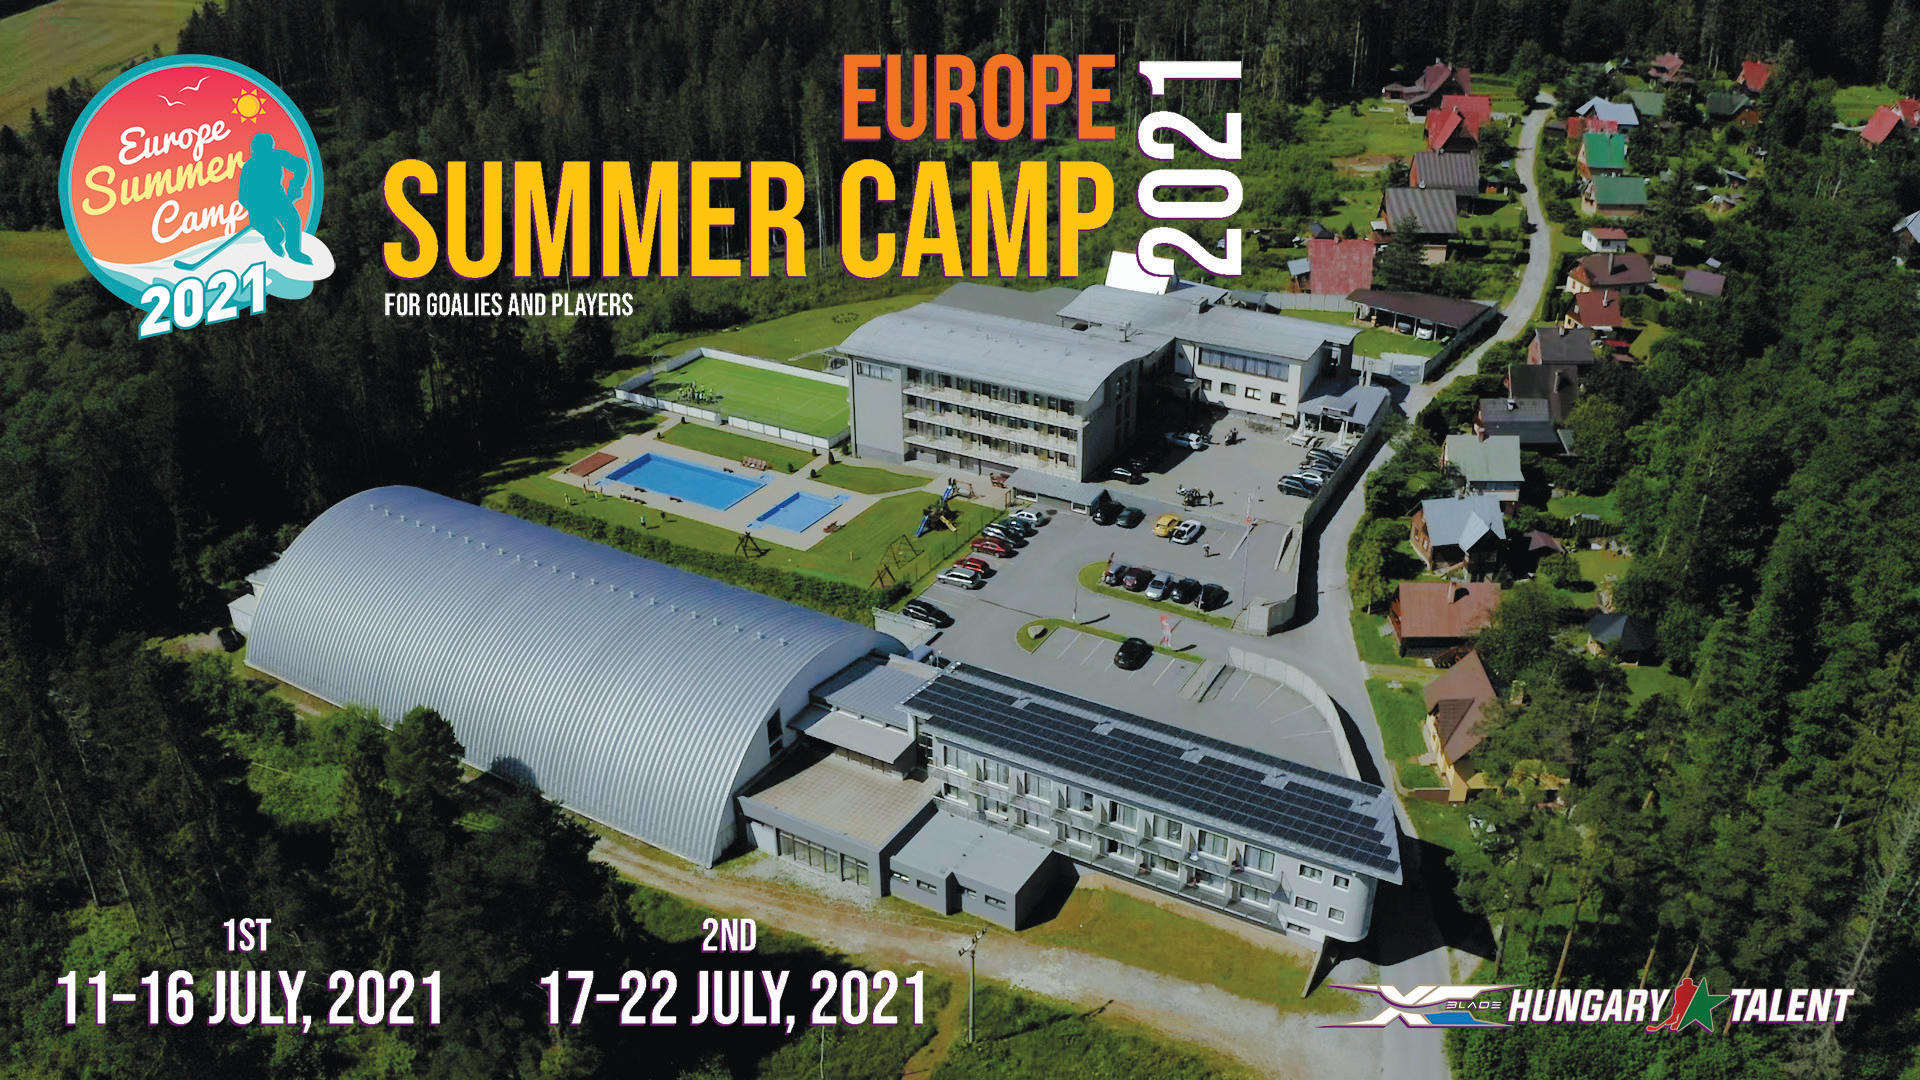 757 participants of the Europe Summer Camp so far - in pictures